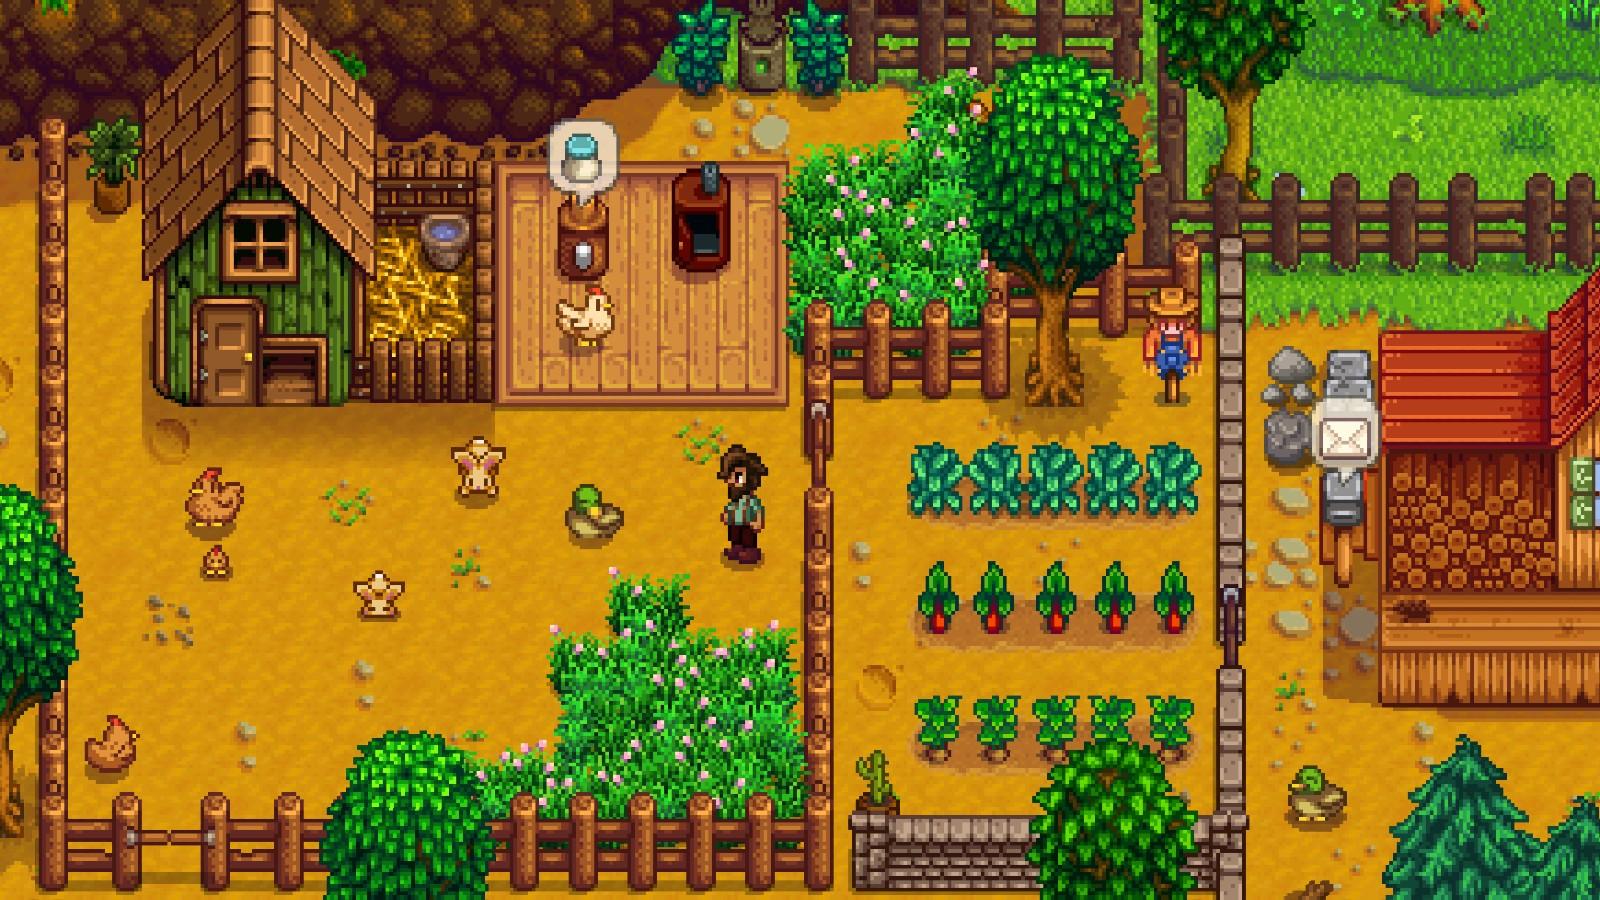 An image of Stardew Valley gameplay.